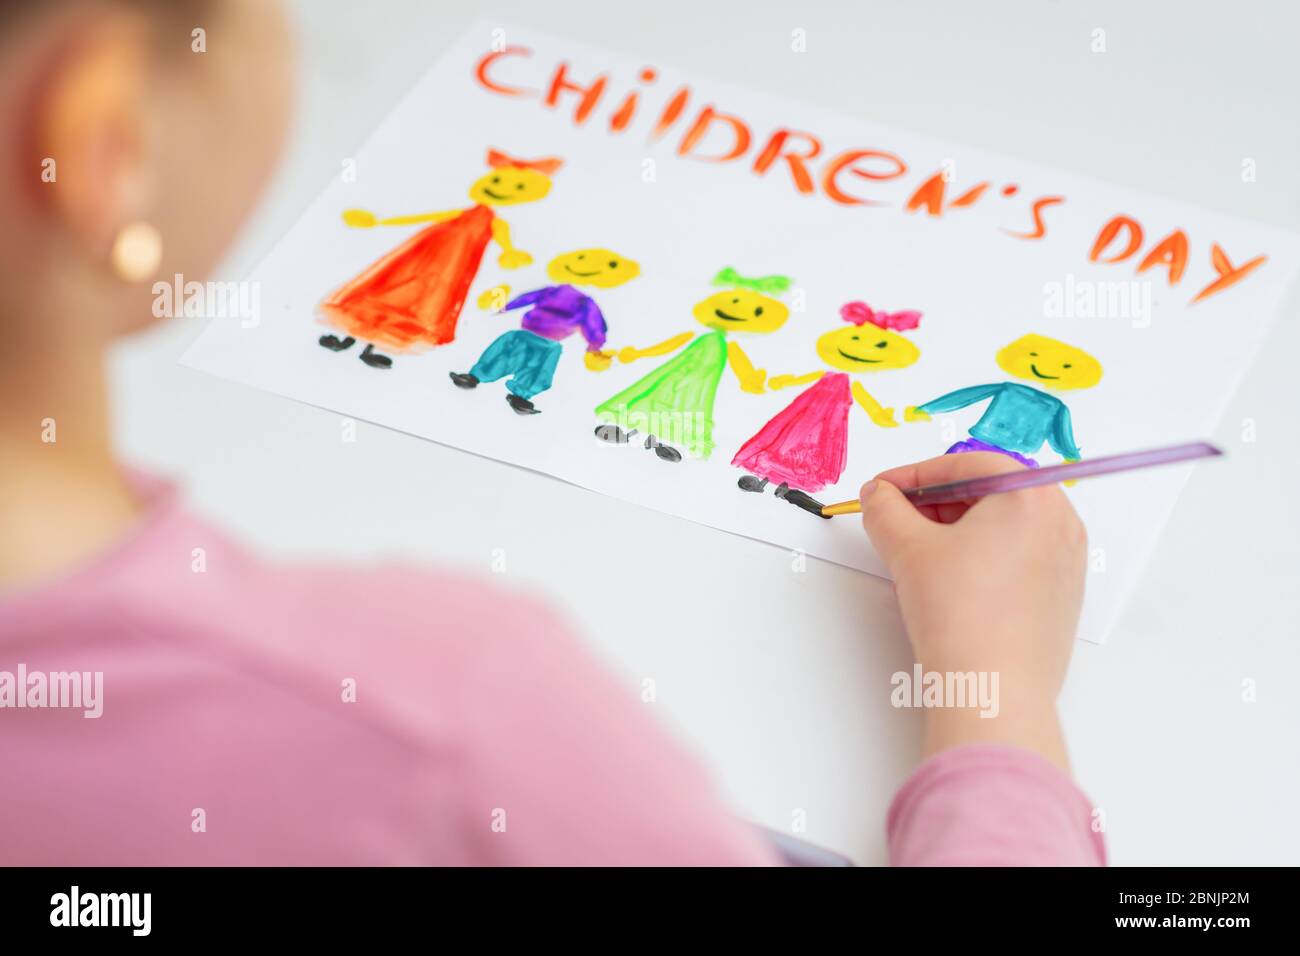 Girl is drawing the colorful children by watercolors with words Children's Day for the holiday Happy Children's Day. Stock Photo